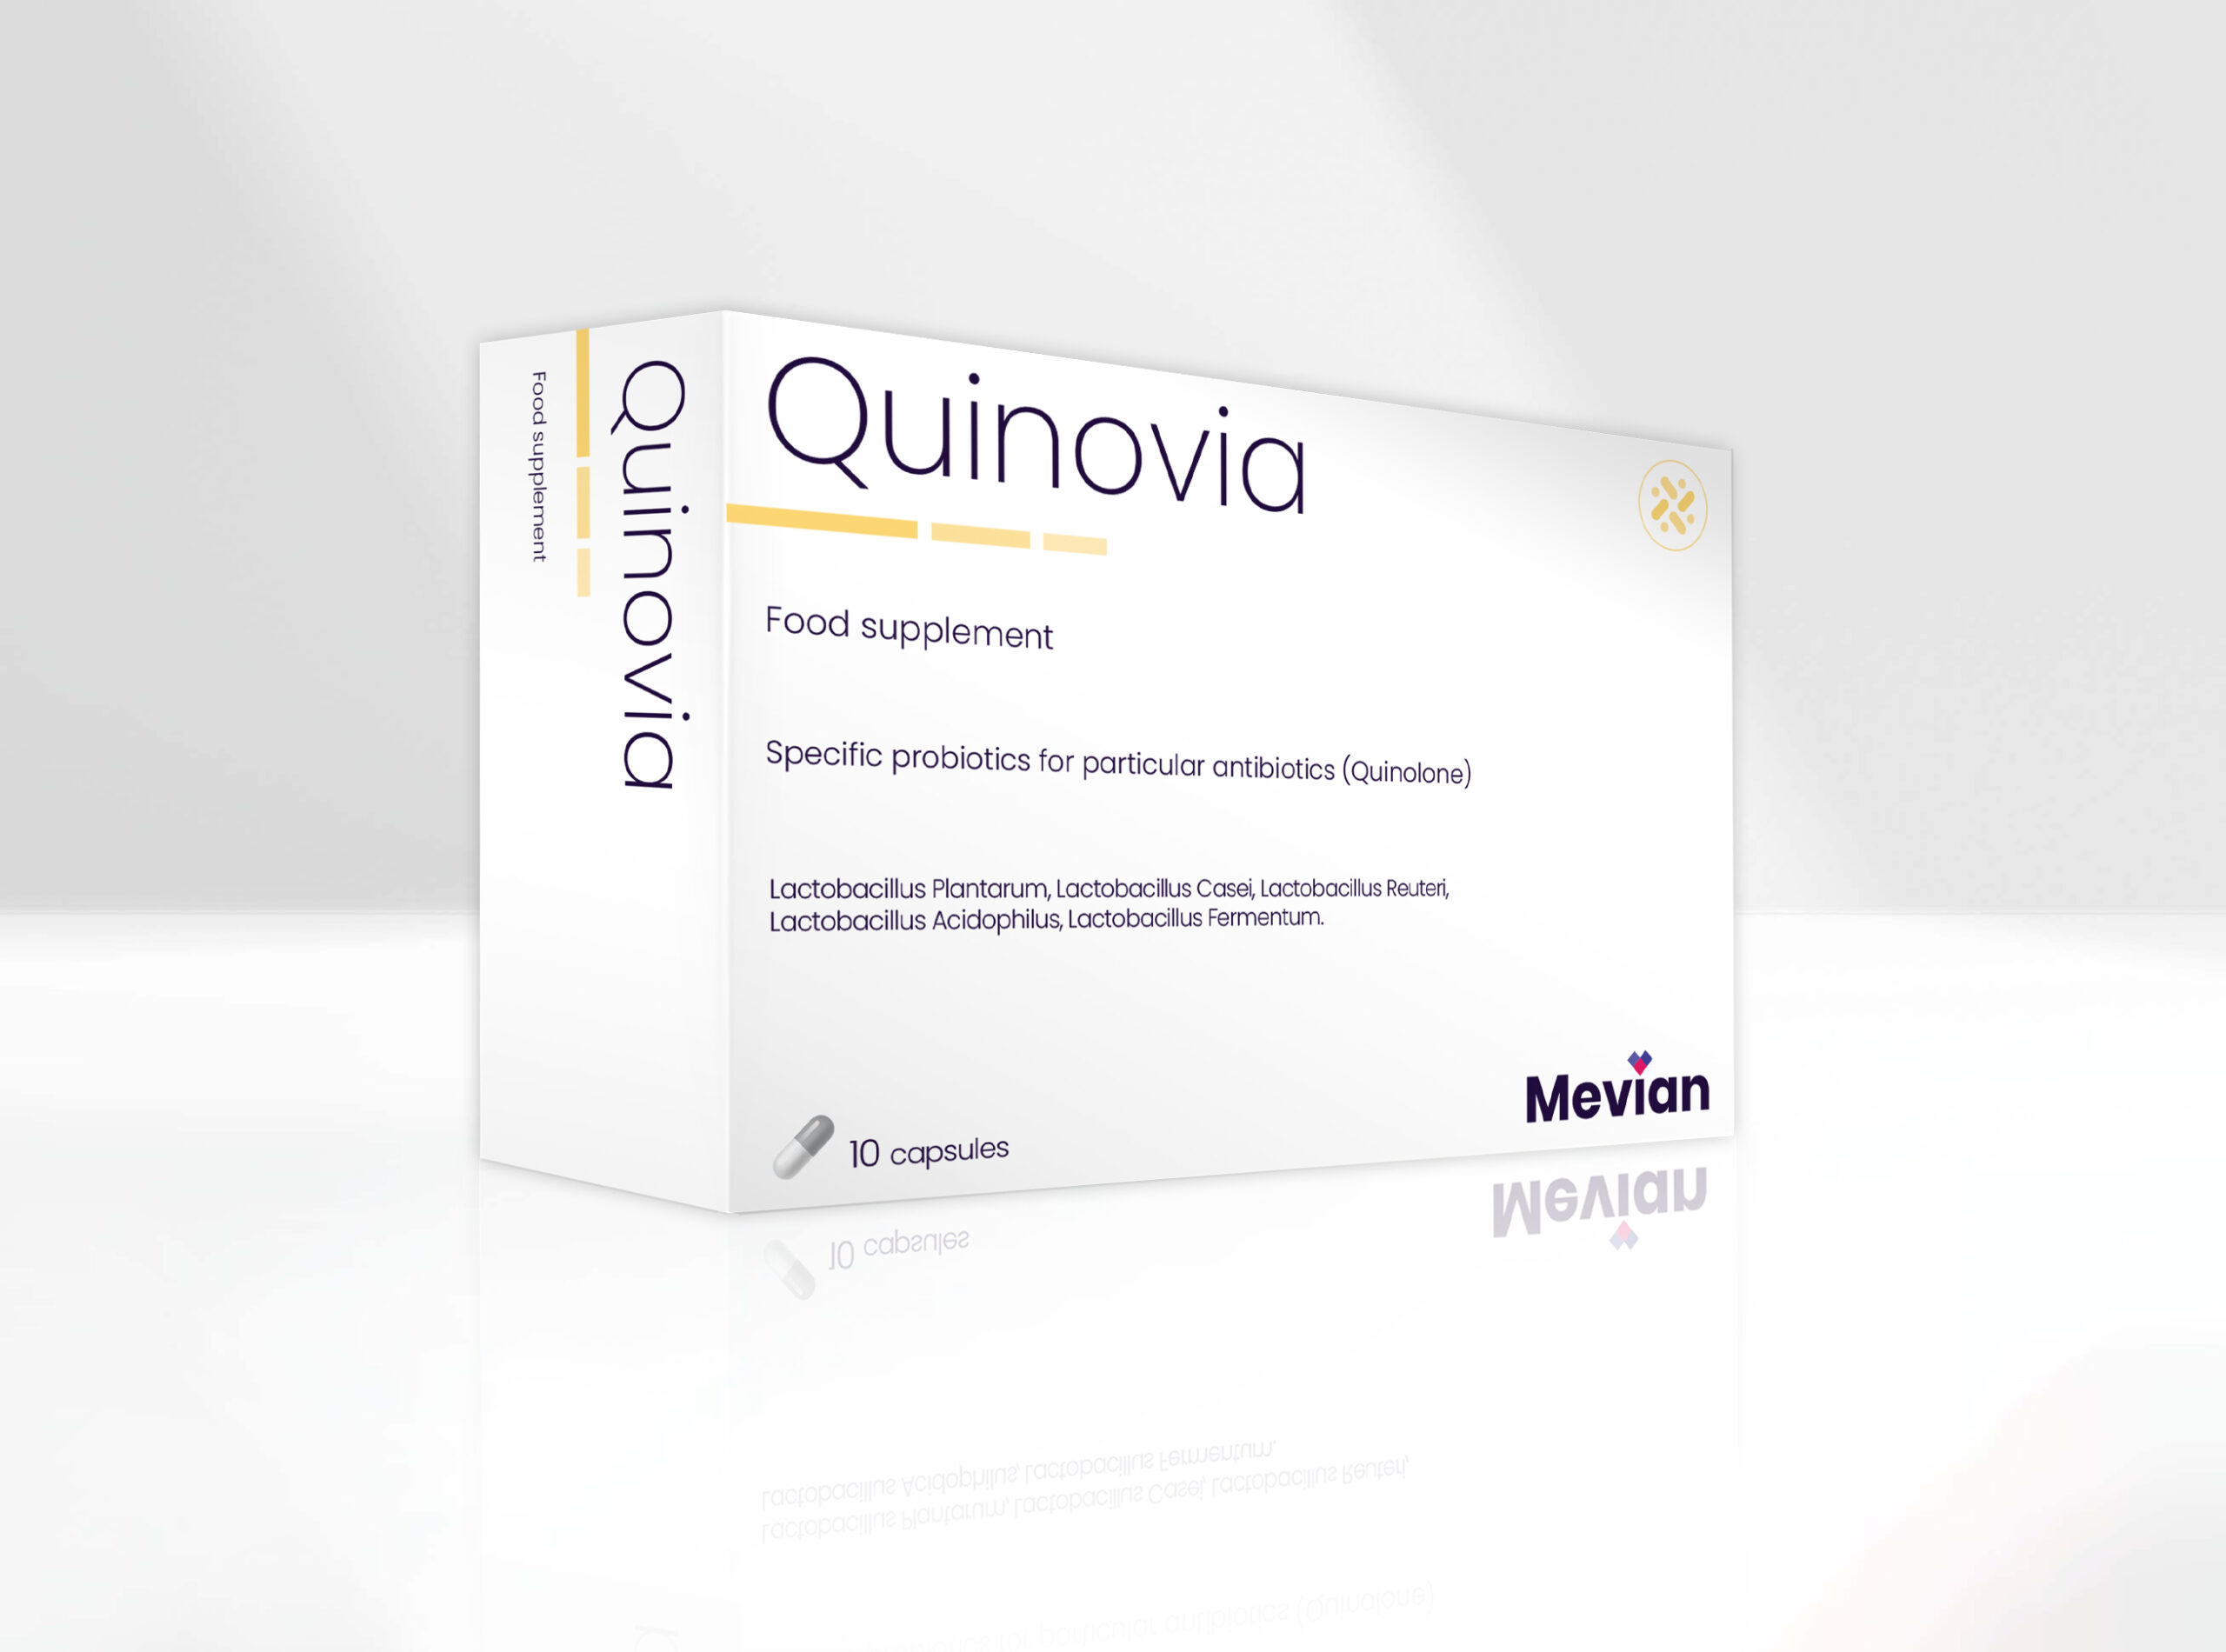 Quinovia is a novel approach in Antibiotic-Associated Side Effects (Diarrhoea, other, etc.) with strains selected for a particular group of antibiotics (Quinolones) based on probiotic strains' sensitivity to antibiotic activity.